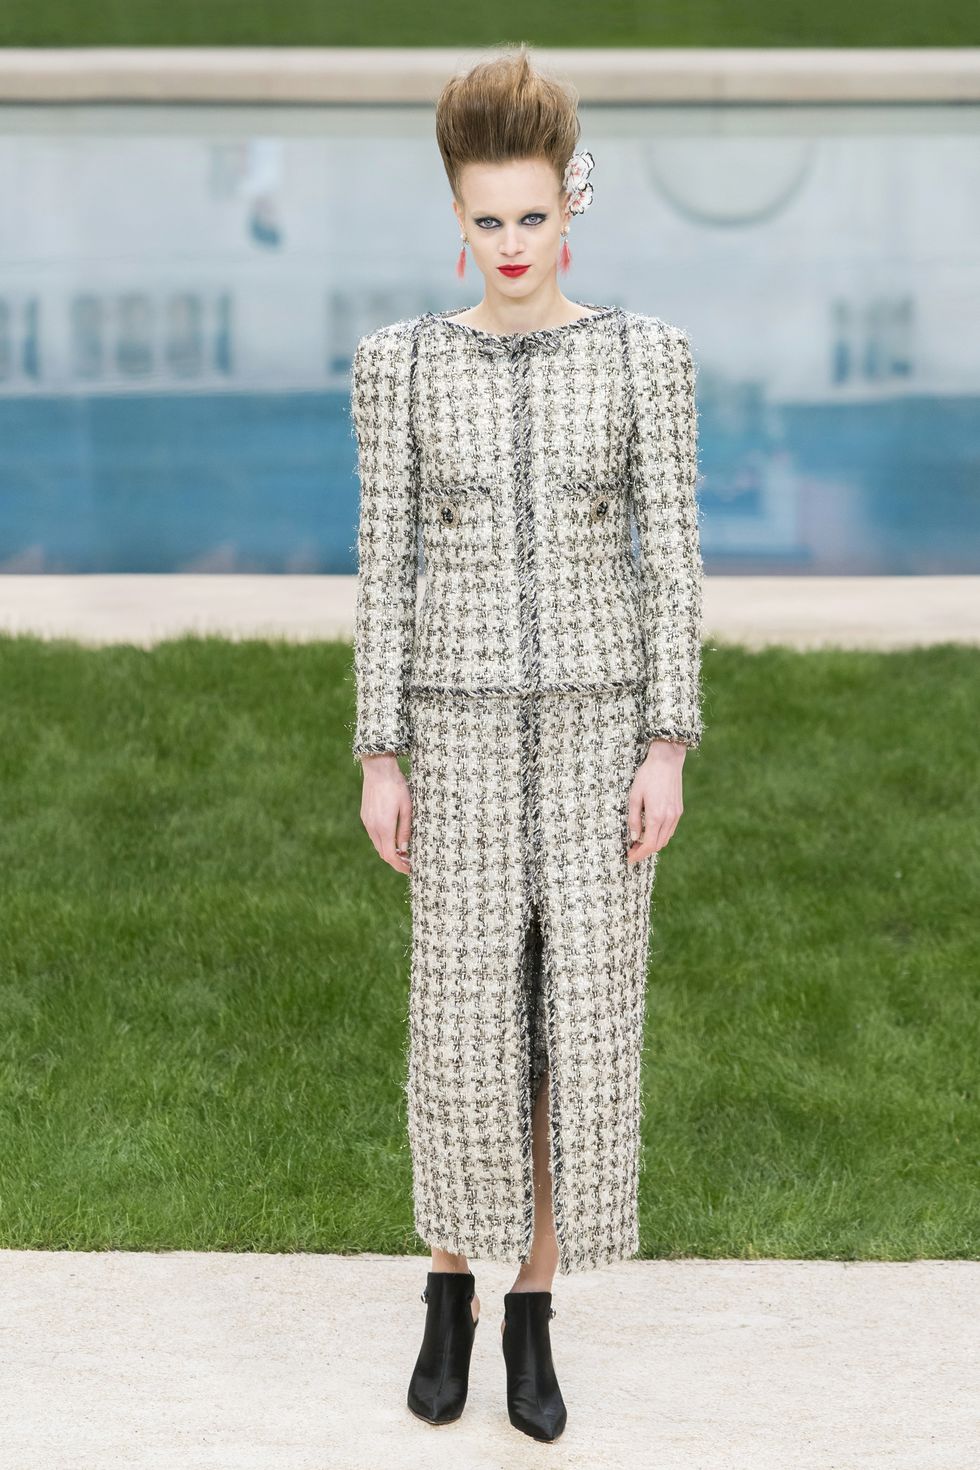 Chanel Runway Dress; Easier Than You Think – Cloning Couture